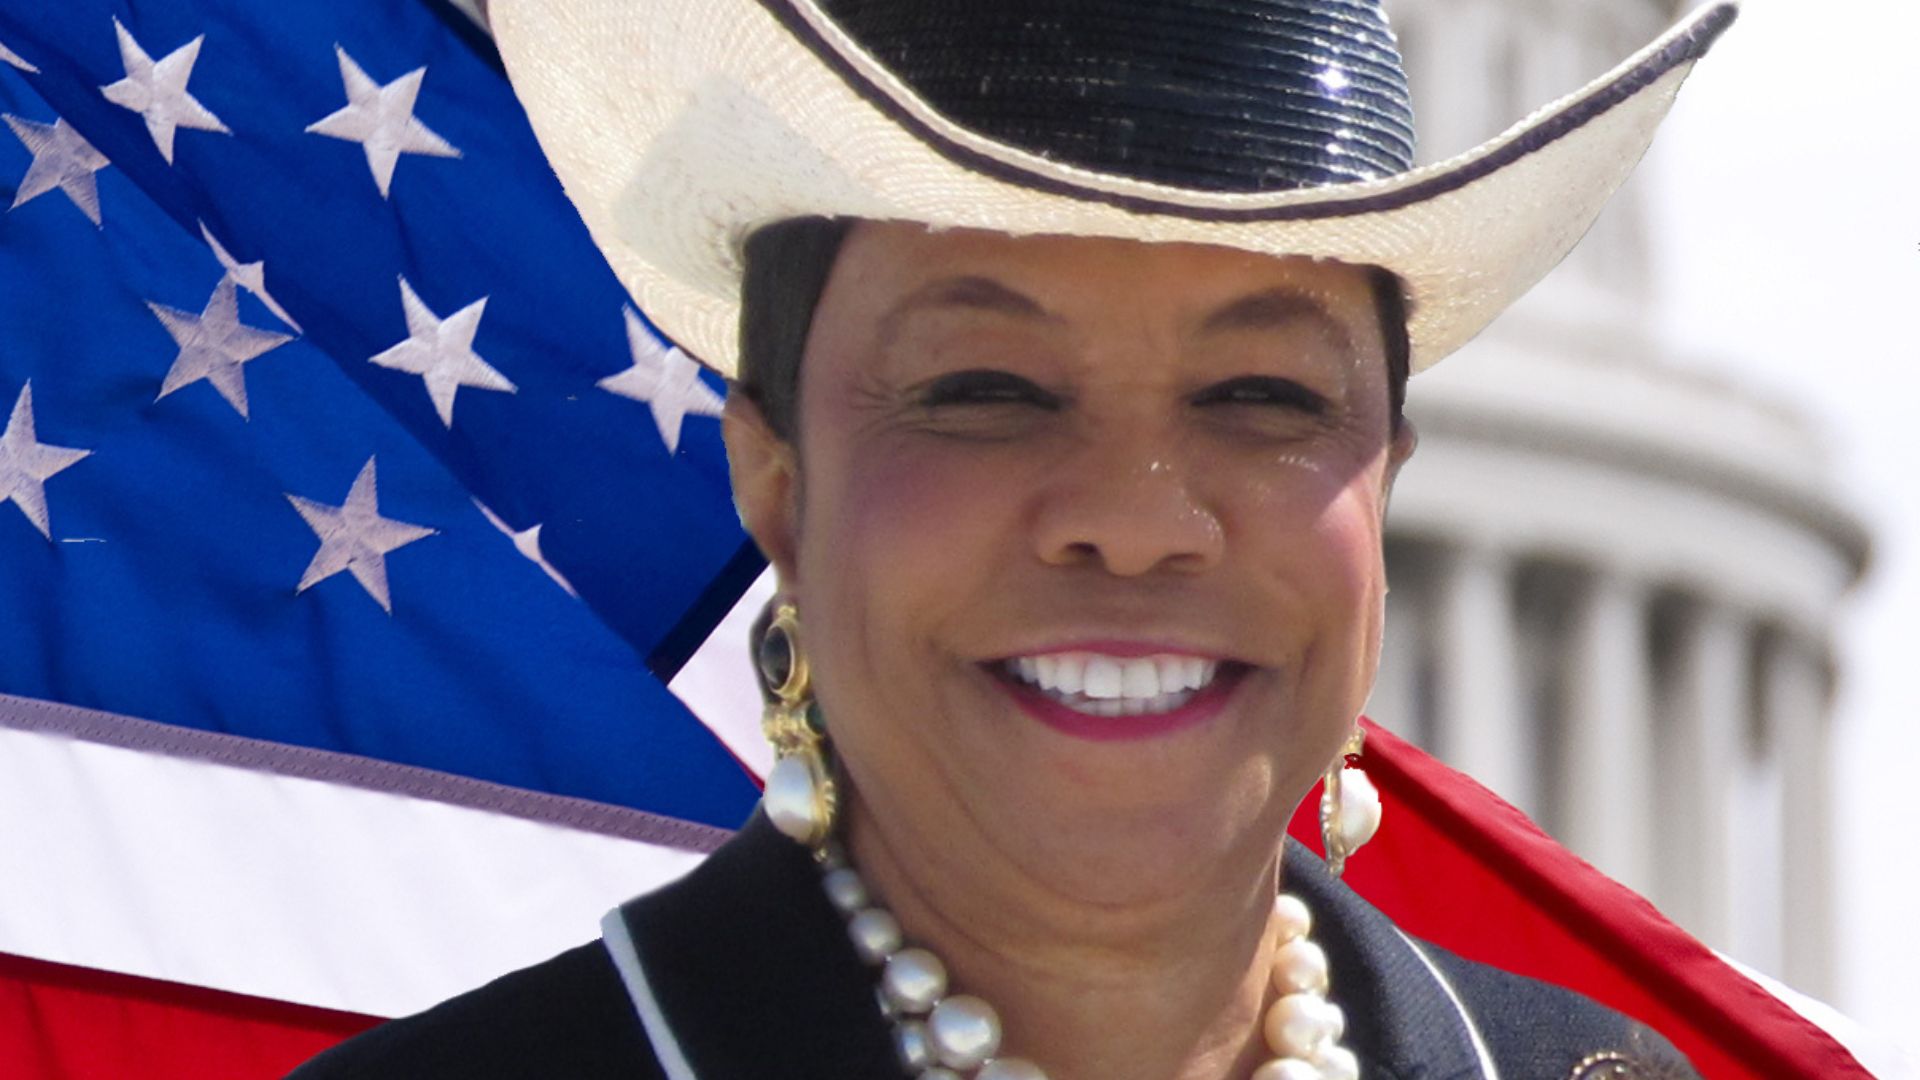 <p>Republicans weren’t the only Florida lawmakers shocked at this move. Florida Democrats, such as Representative Frederica Wilson, said that Cuban officials and the Cuban government shouldn’t have any place in the U.S. government.    </p> <p>Meanwhile, Democratic Miami-Dade County Mayor Danielle Levine Cava and Miami City Manager Emilio González also <a href="https://floridapolitics.com/archives/675647-whos-visiting-next-north-koreans-south-florida-gop-officials-decry-cuban-tour-of-miami-airport-security/">called out</a> this tour.     </p>